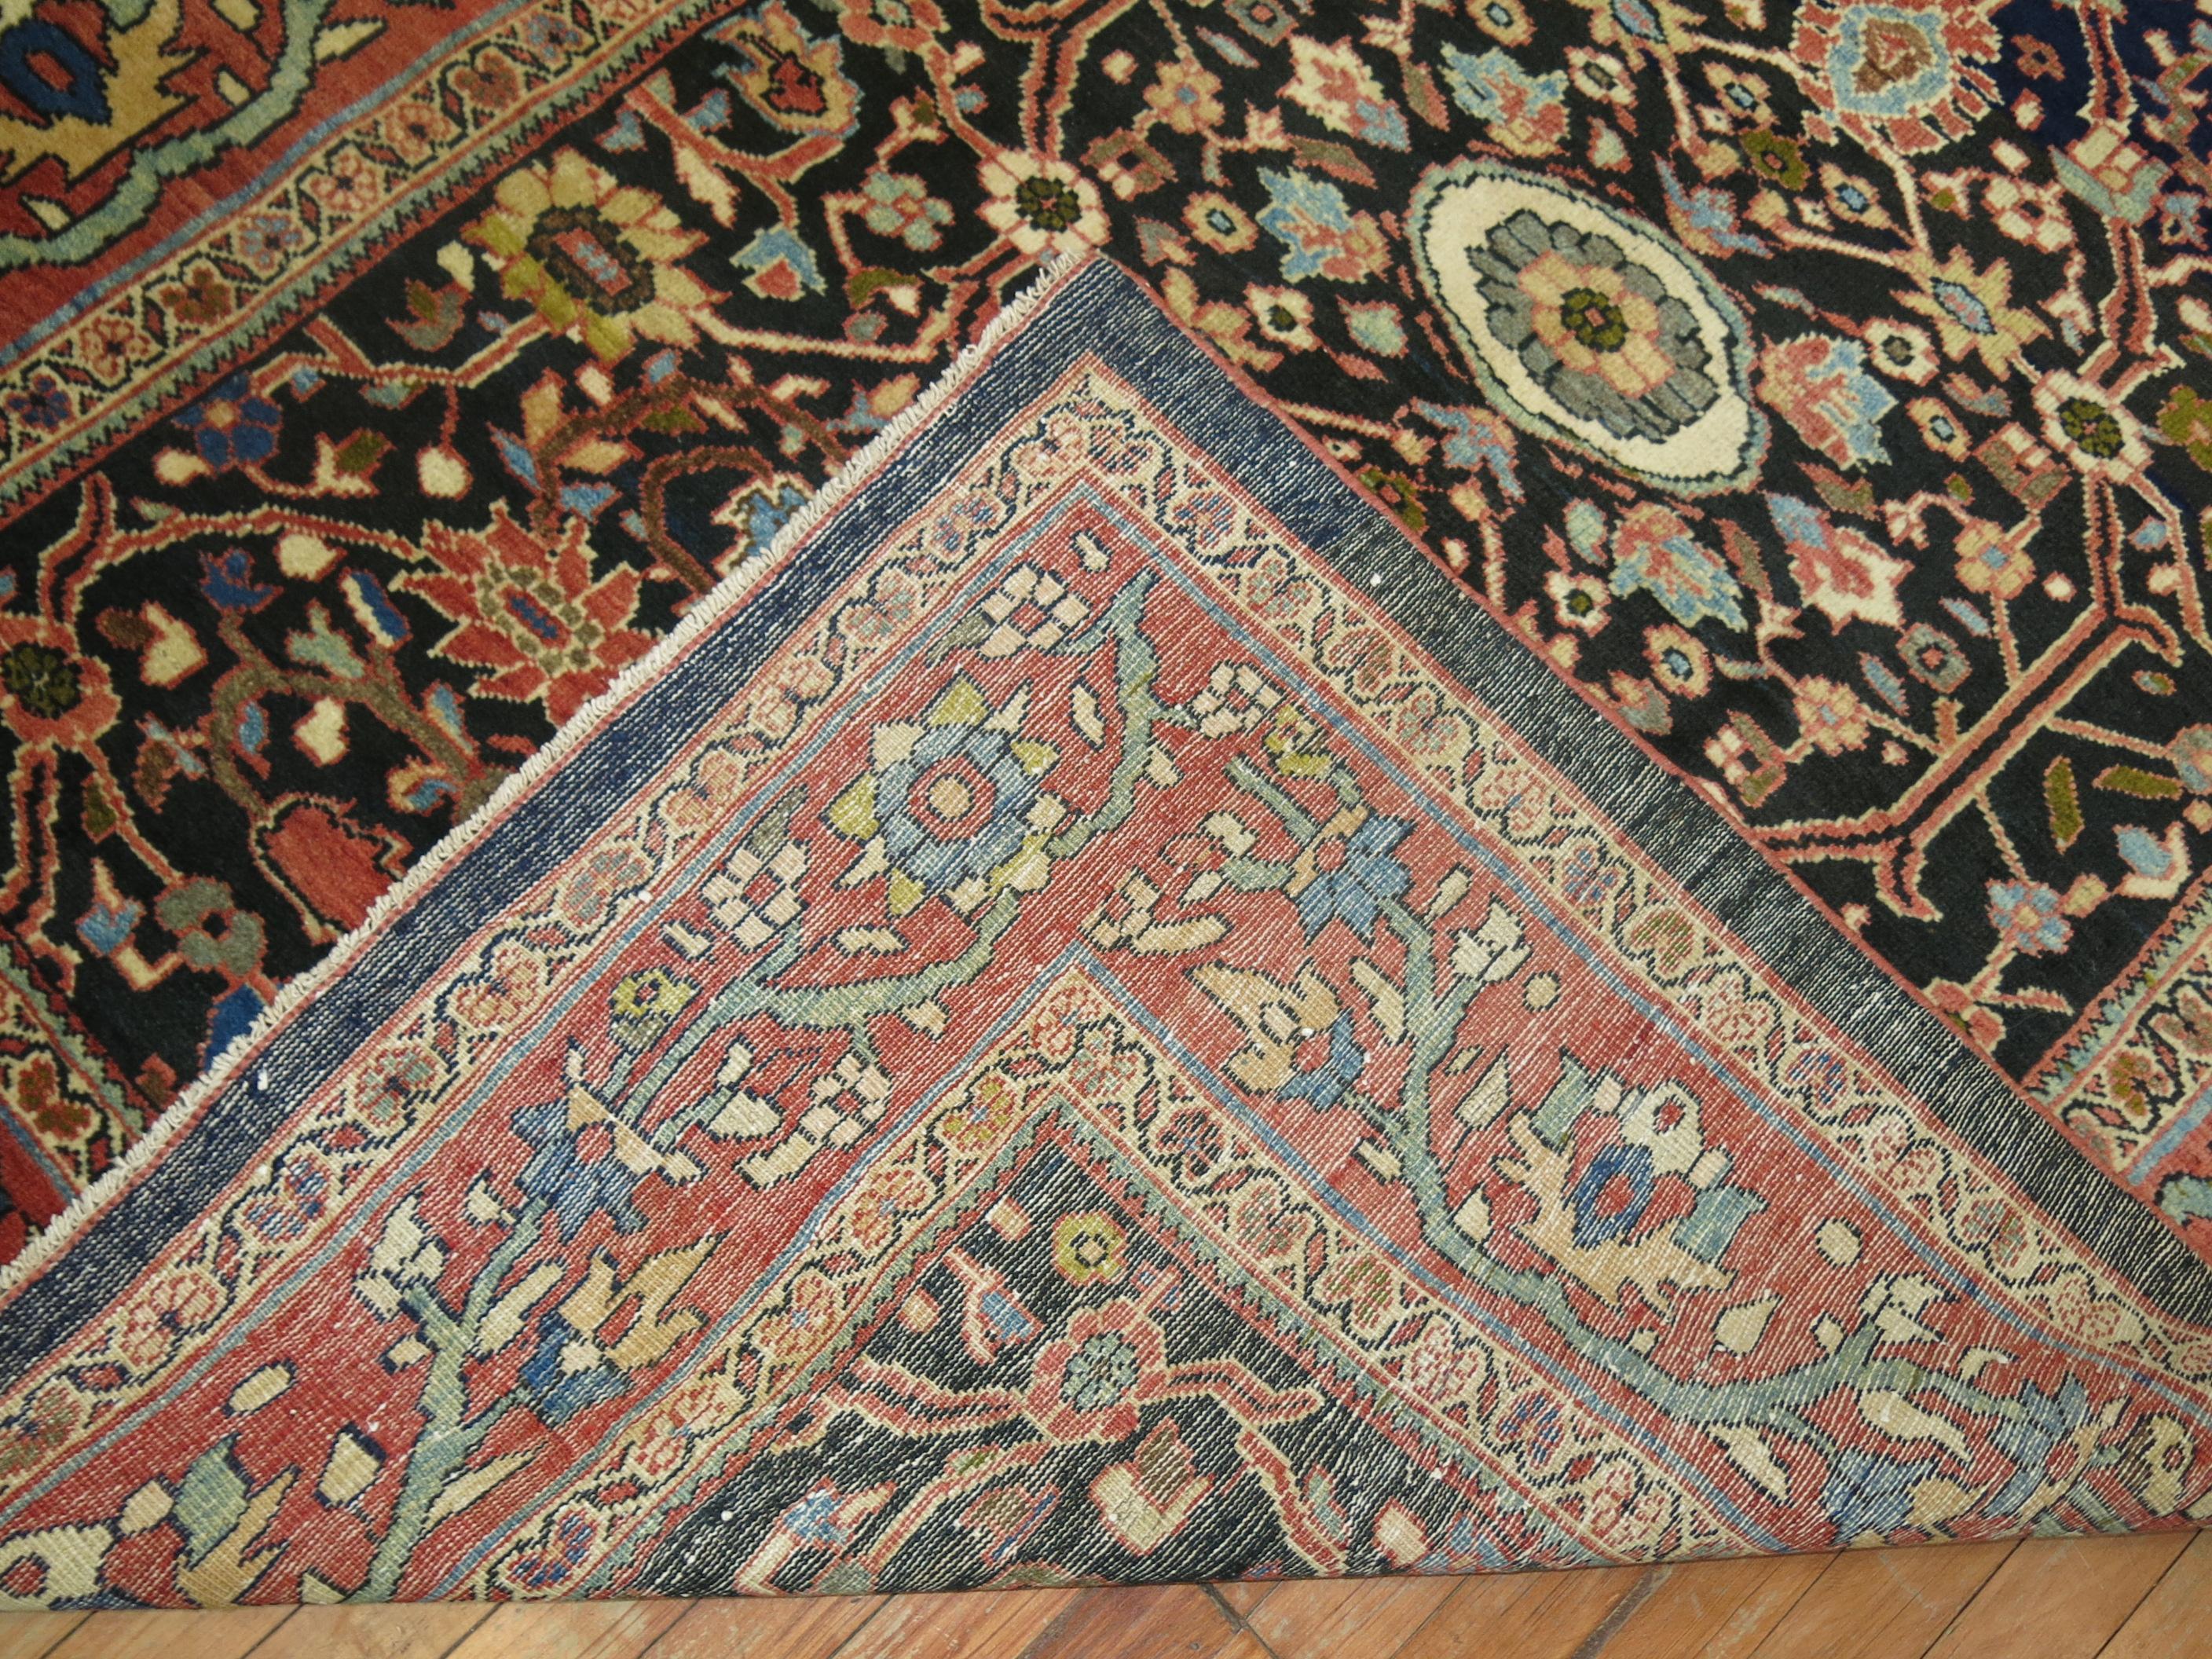 A connoisseur caliber rare size early 20th century Persian mahal Sultanabad carpet.

Woven in a series of villages in Western Central Iran, Sultanabad carpets employ over-scale, spacious all-over patterns that are highly prized for their